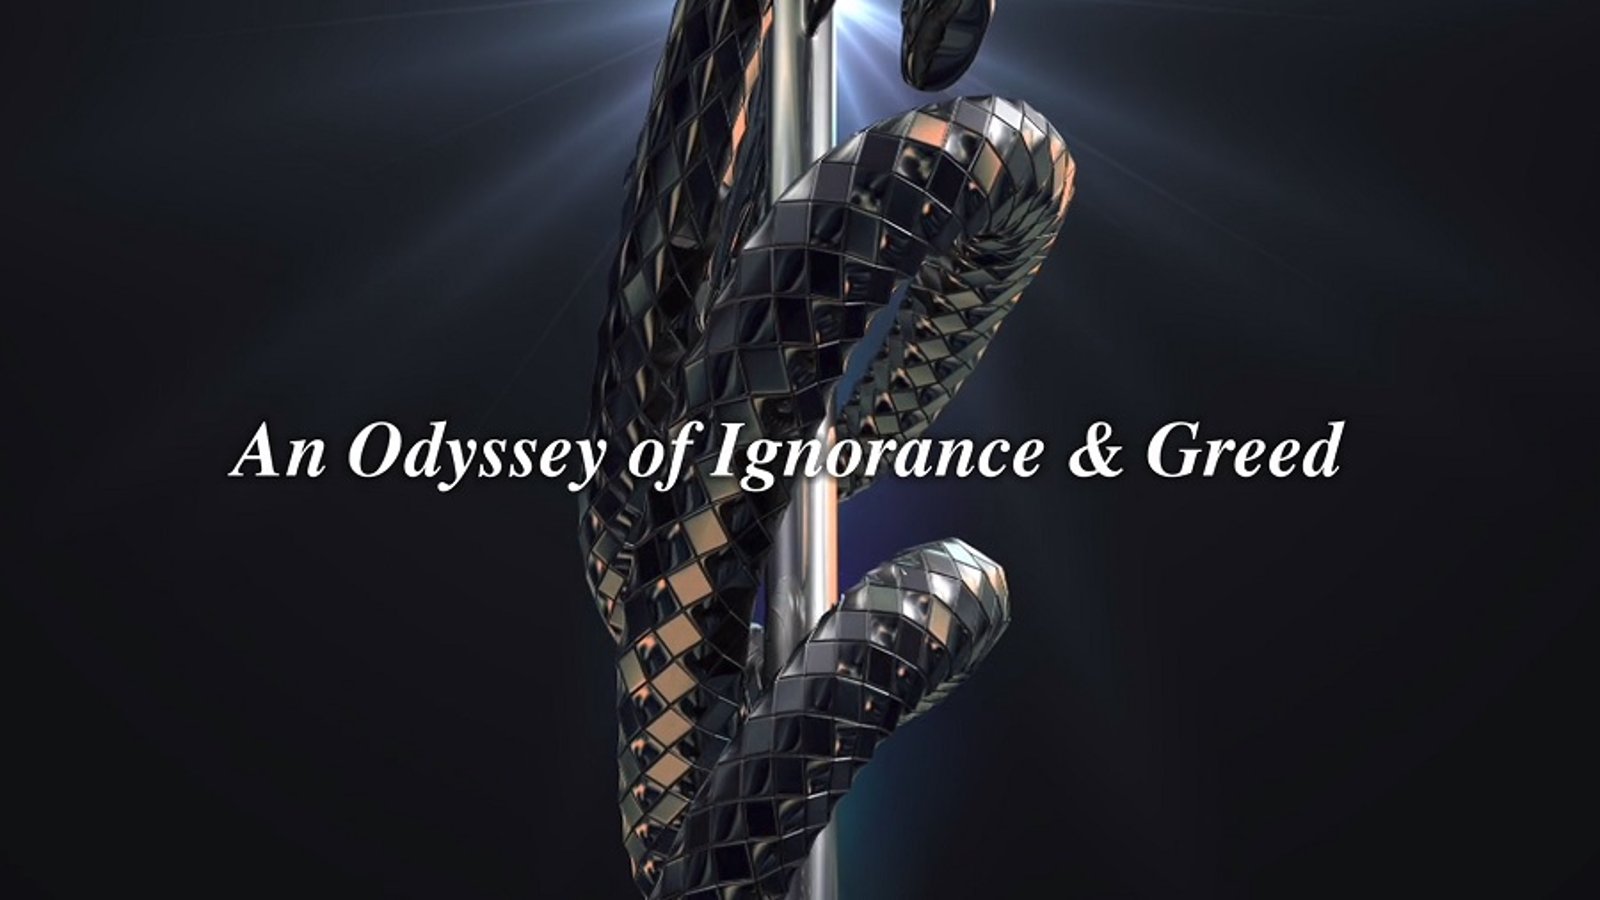 An Odyssey of Ignorance & Greed